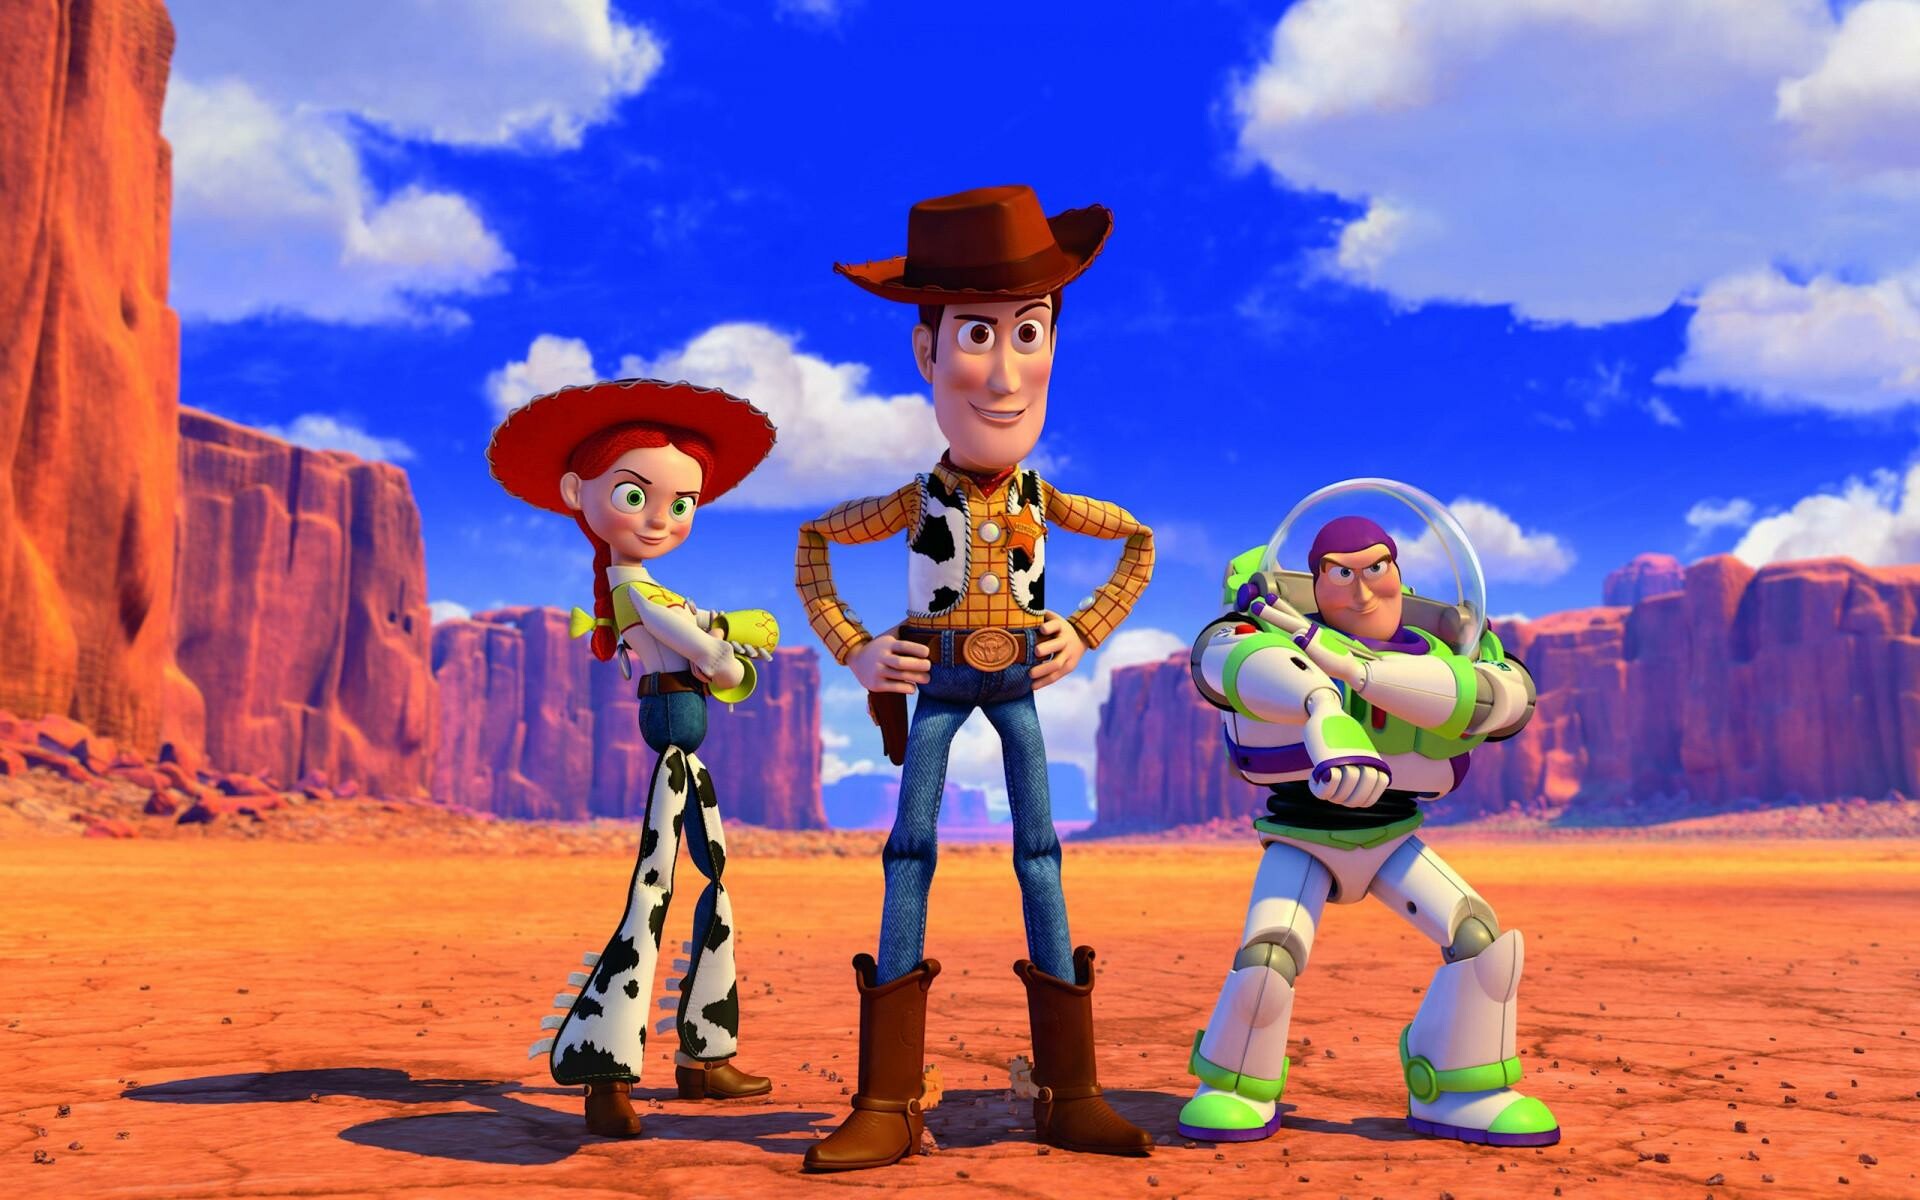 Toy Story in high quality, Clear wallpapers, Animated joy, Classic characters, 1920x1200 HD Desktop